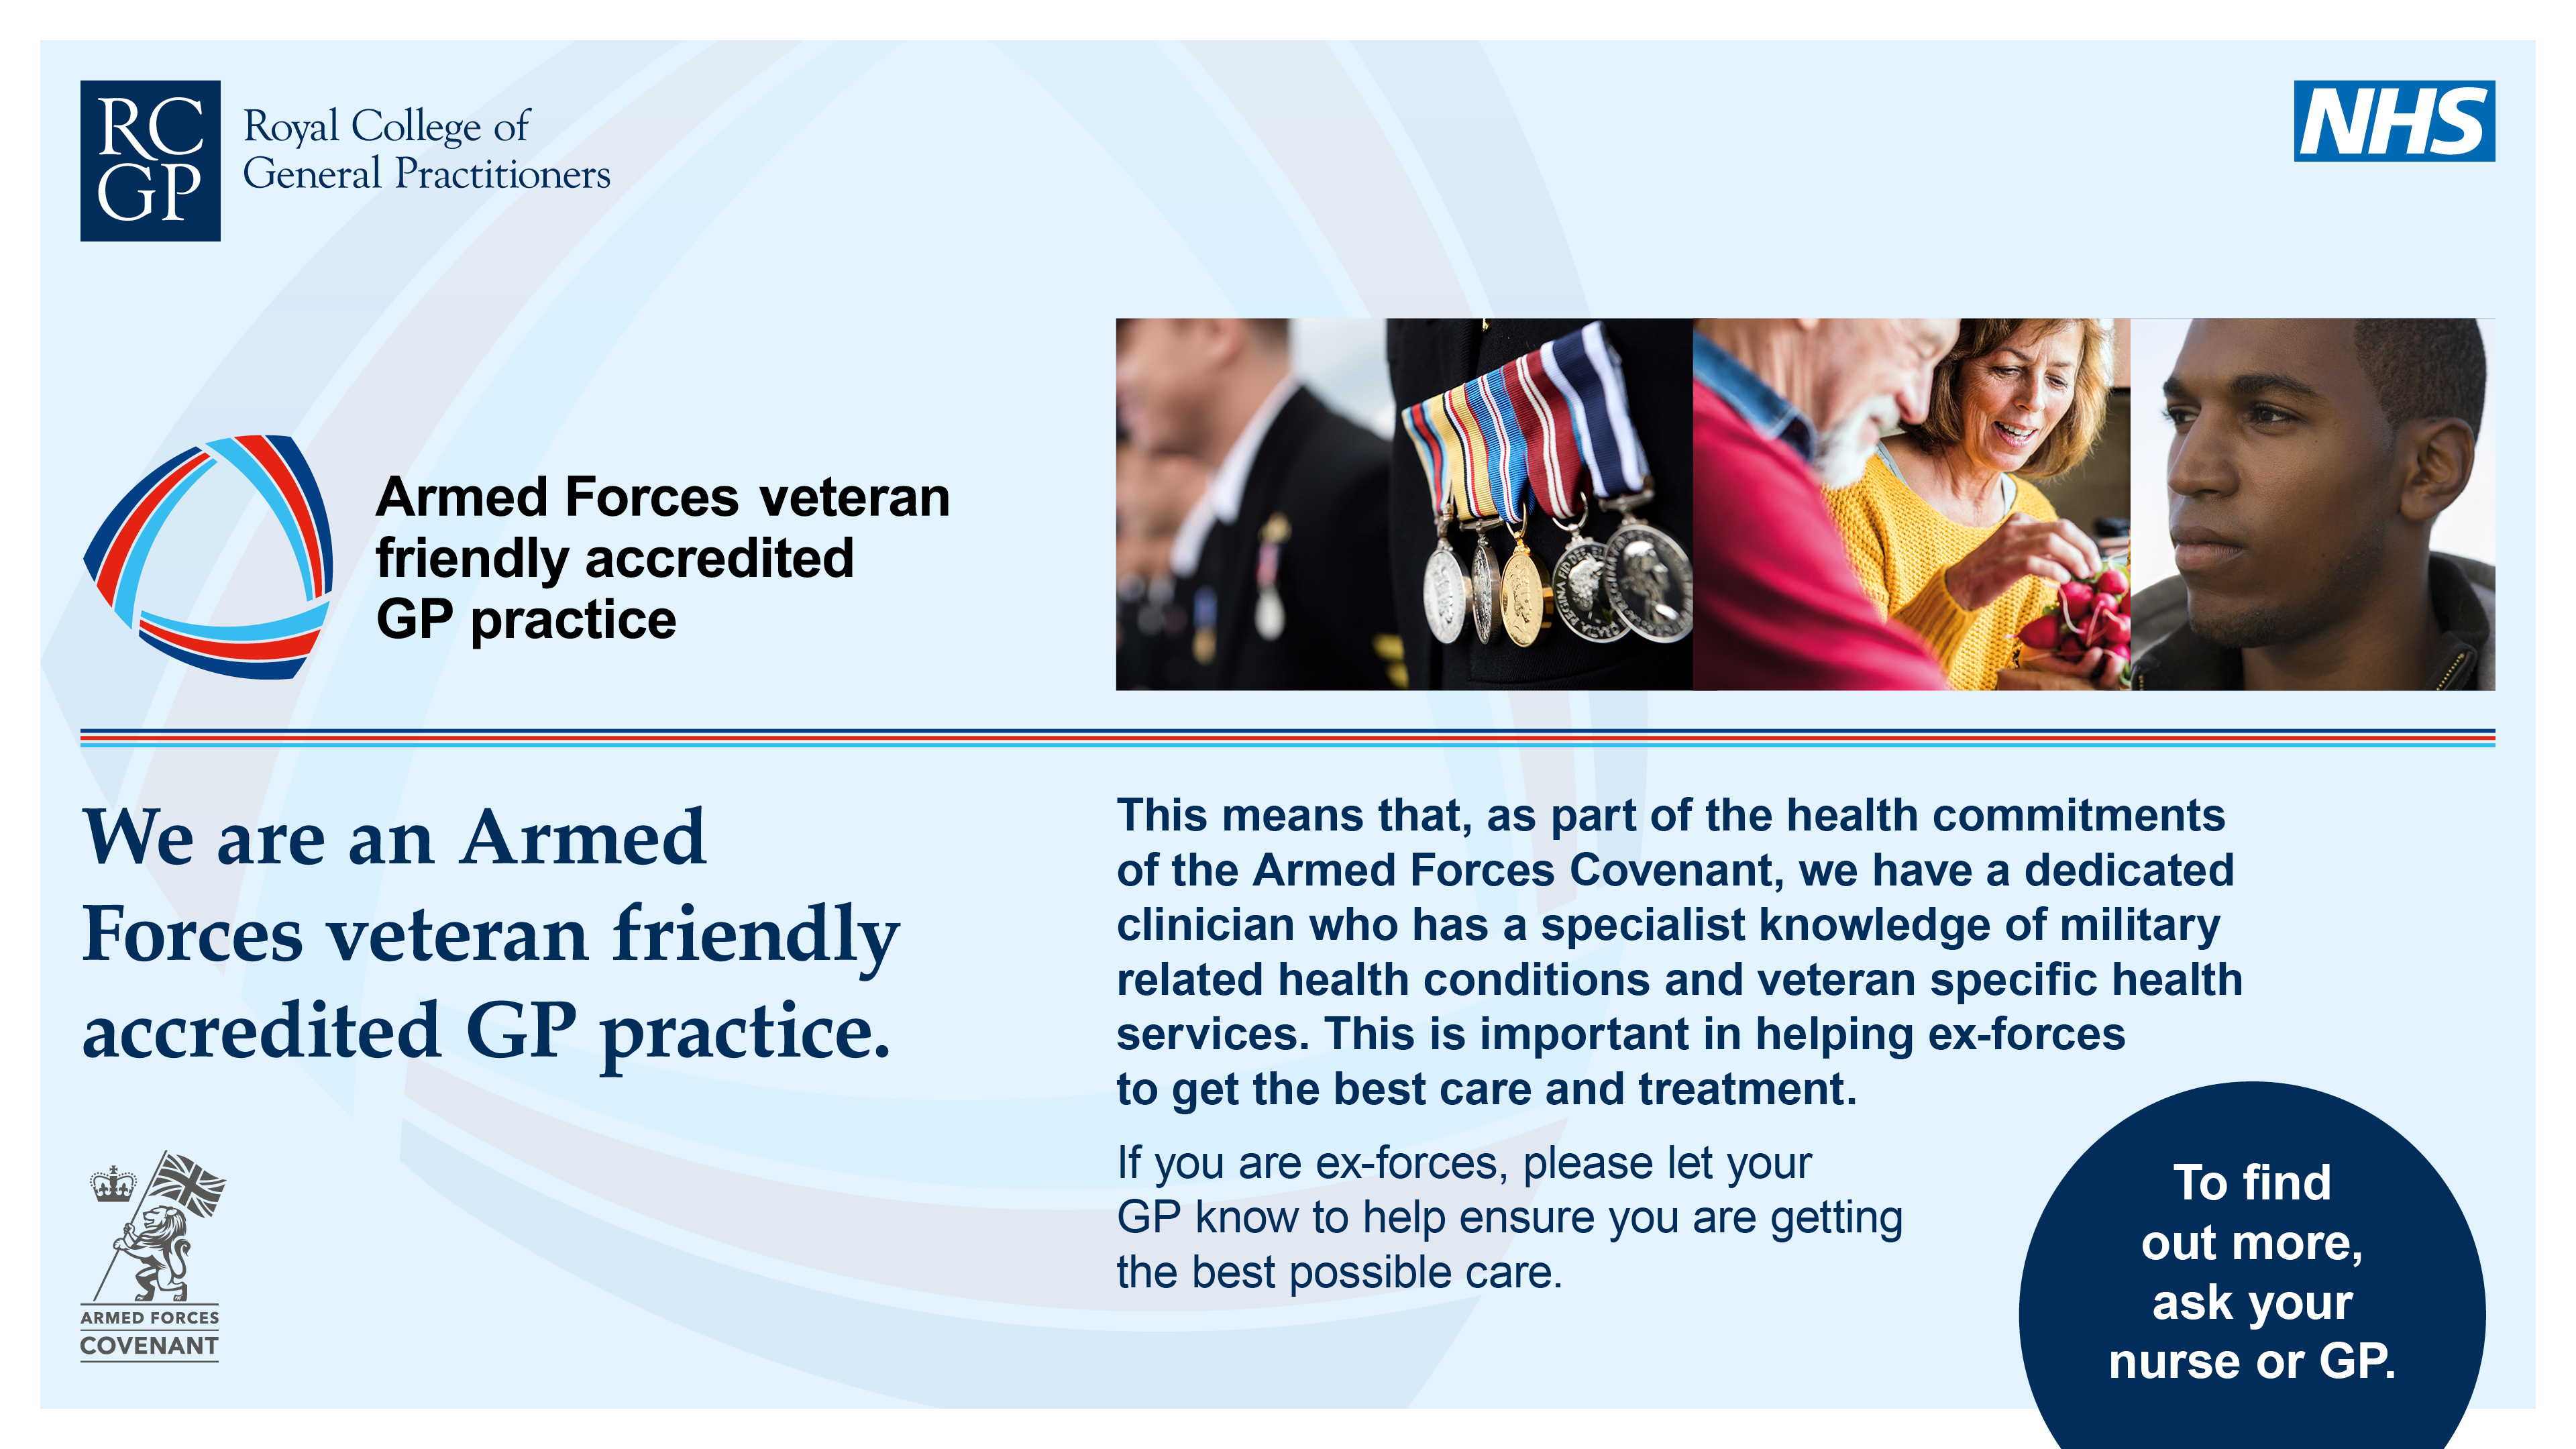 We are an Armed Forces Veteran Friendly Accredited practice